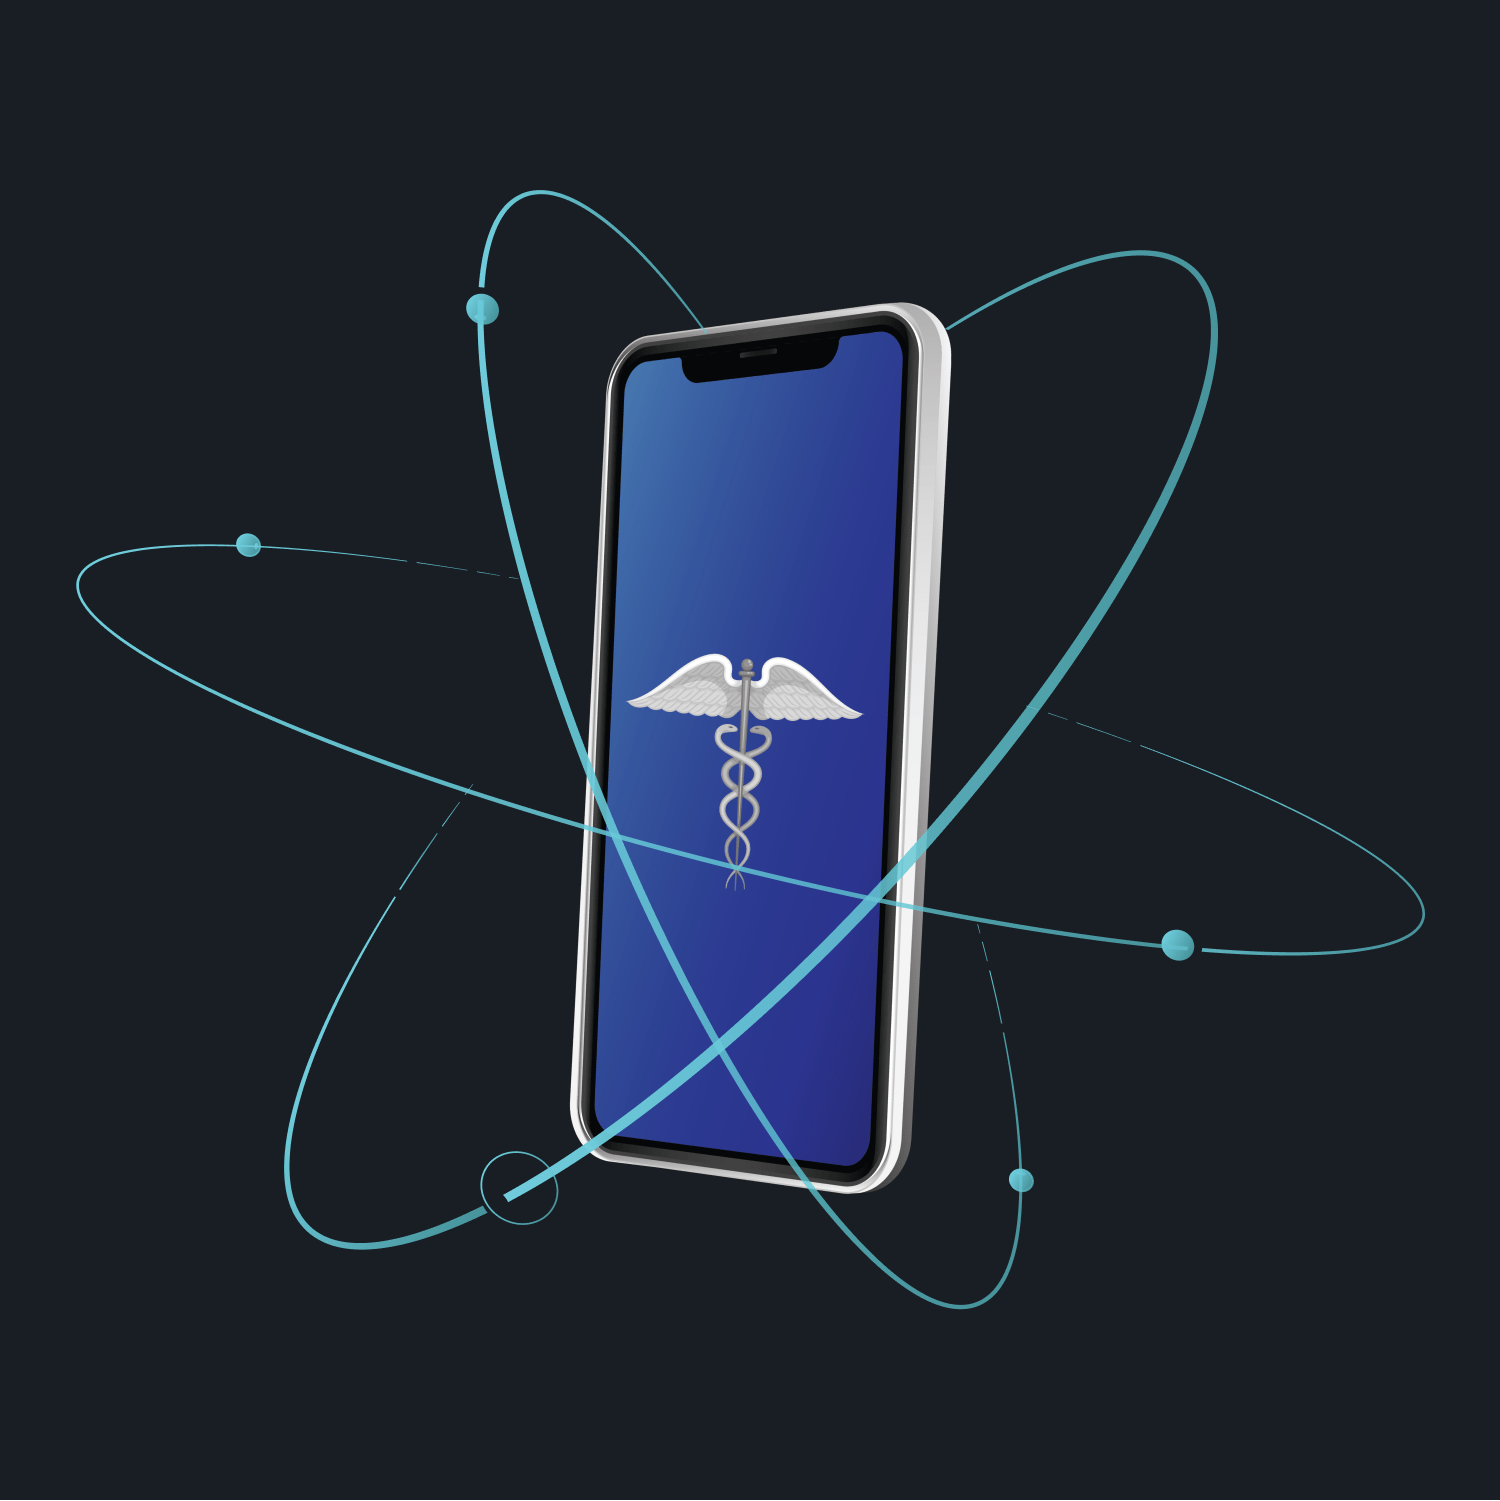 Integrating with Apple's Health App - Today's Medical Developments